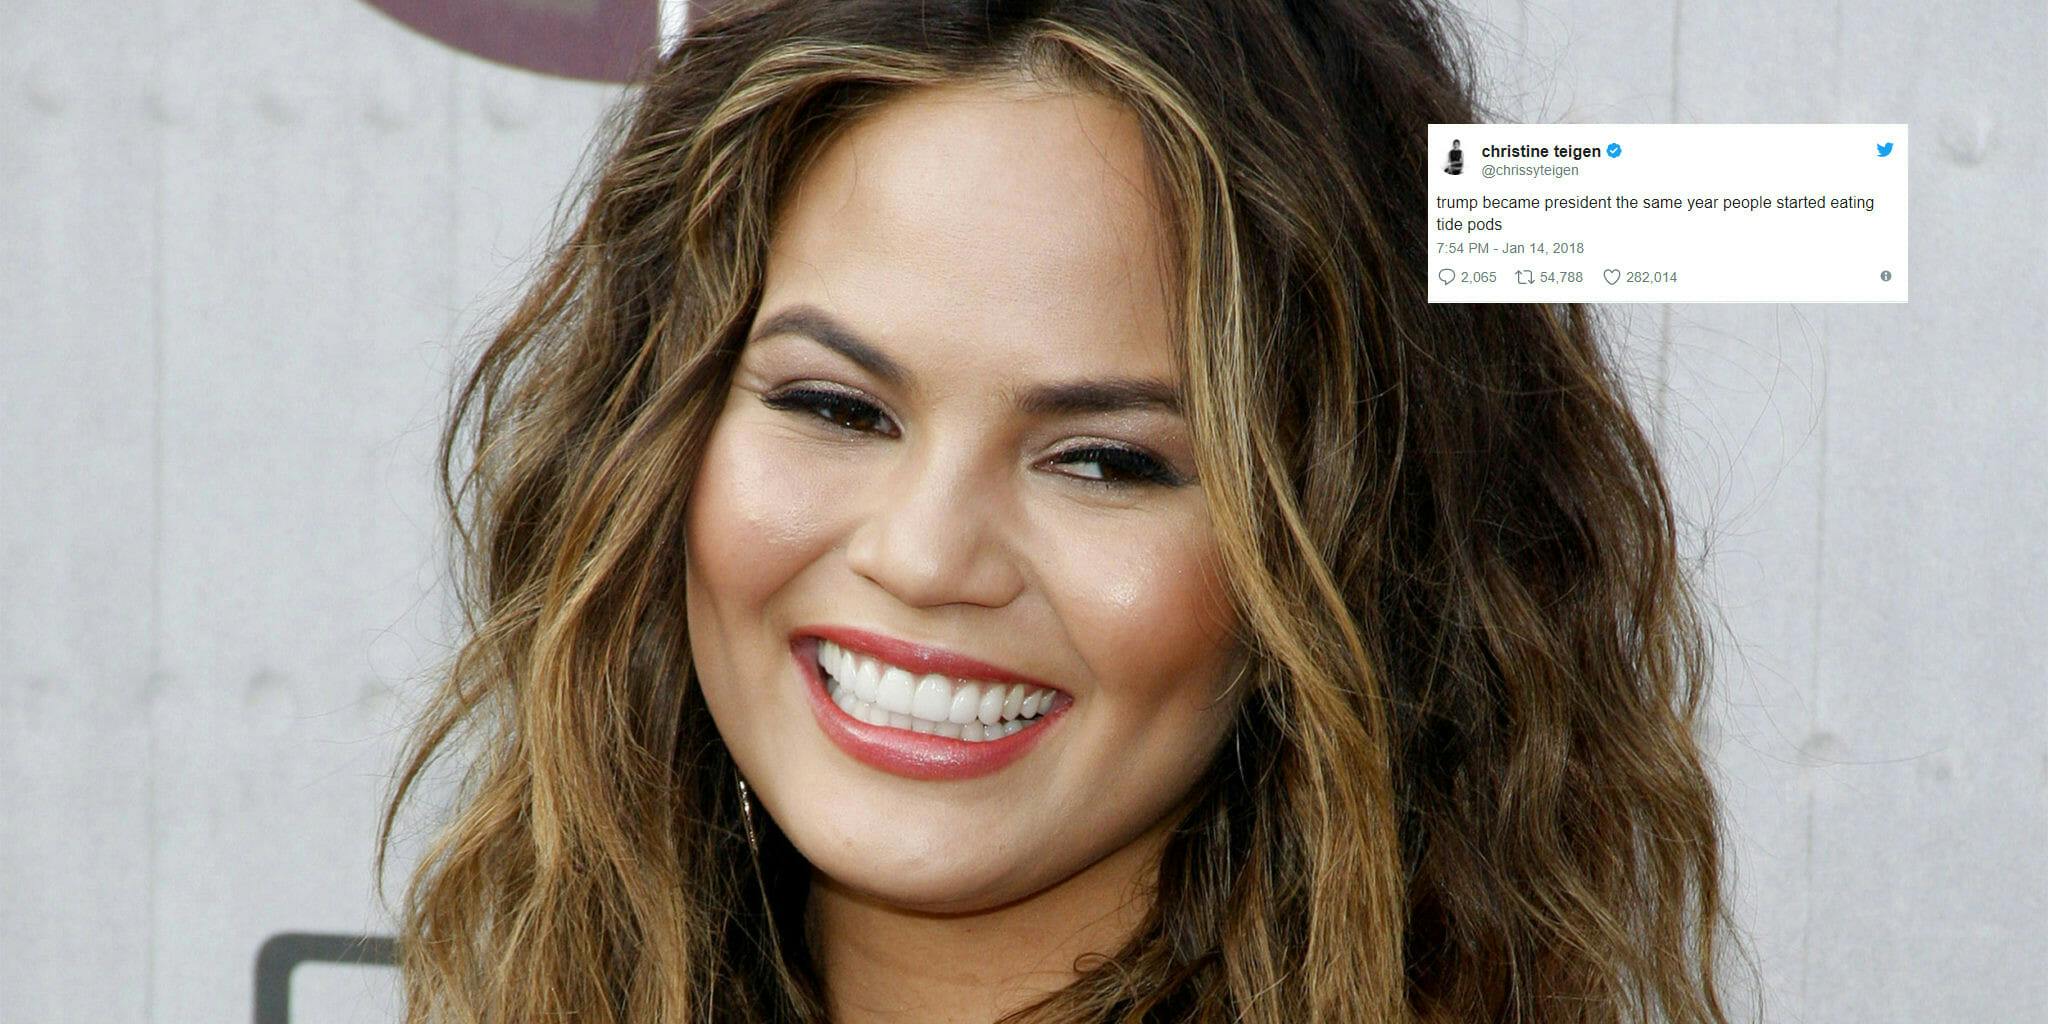 Chrissy Teigen Found the Connection Between Trump and Tide Pods